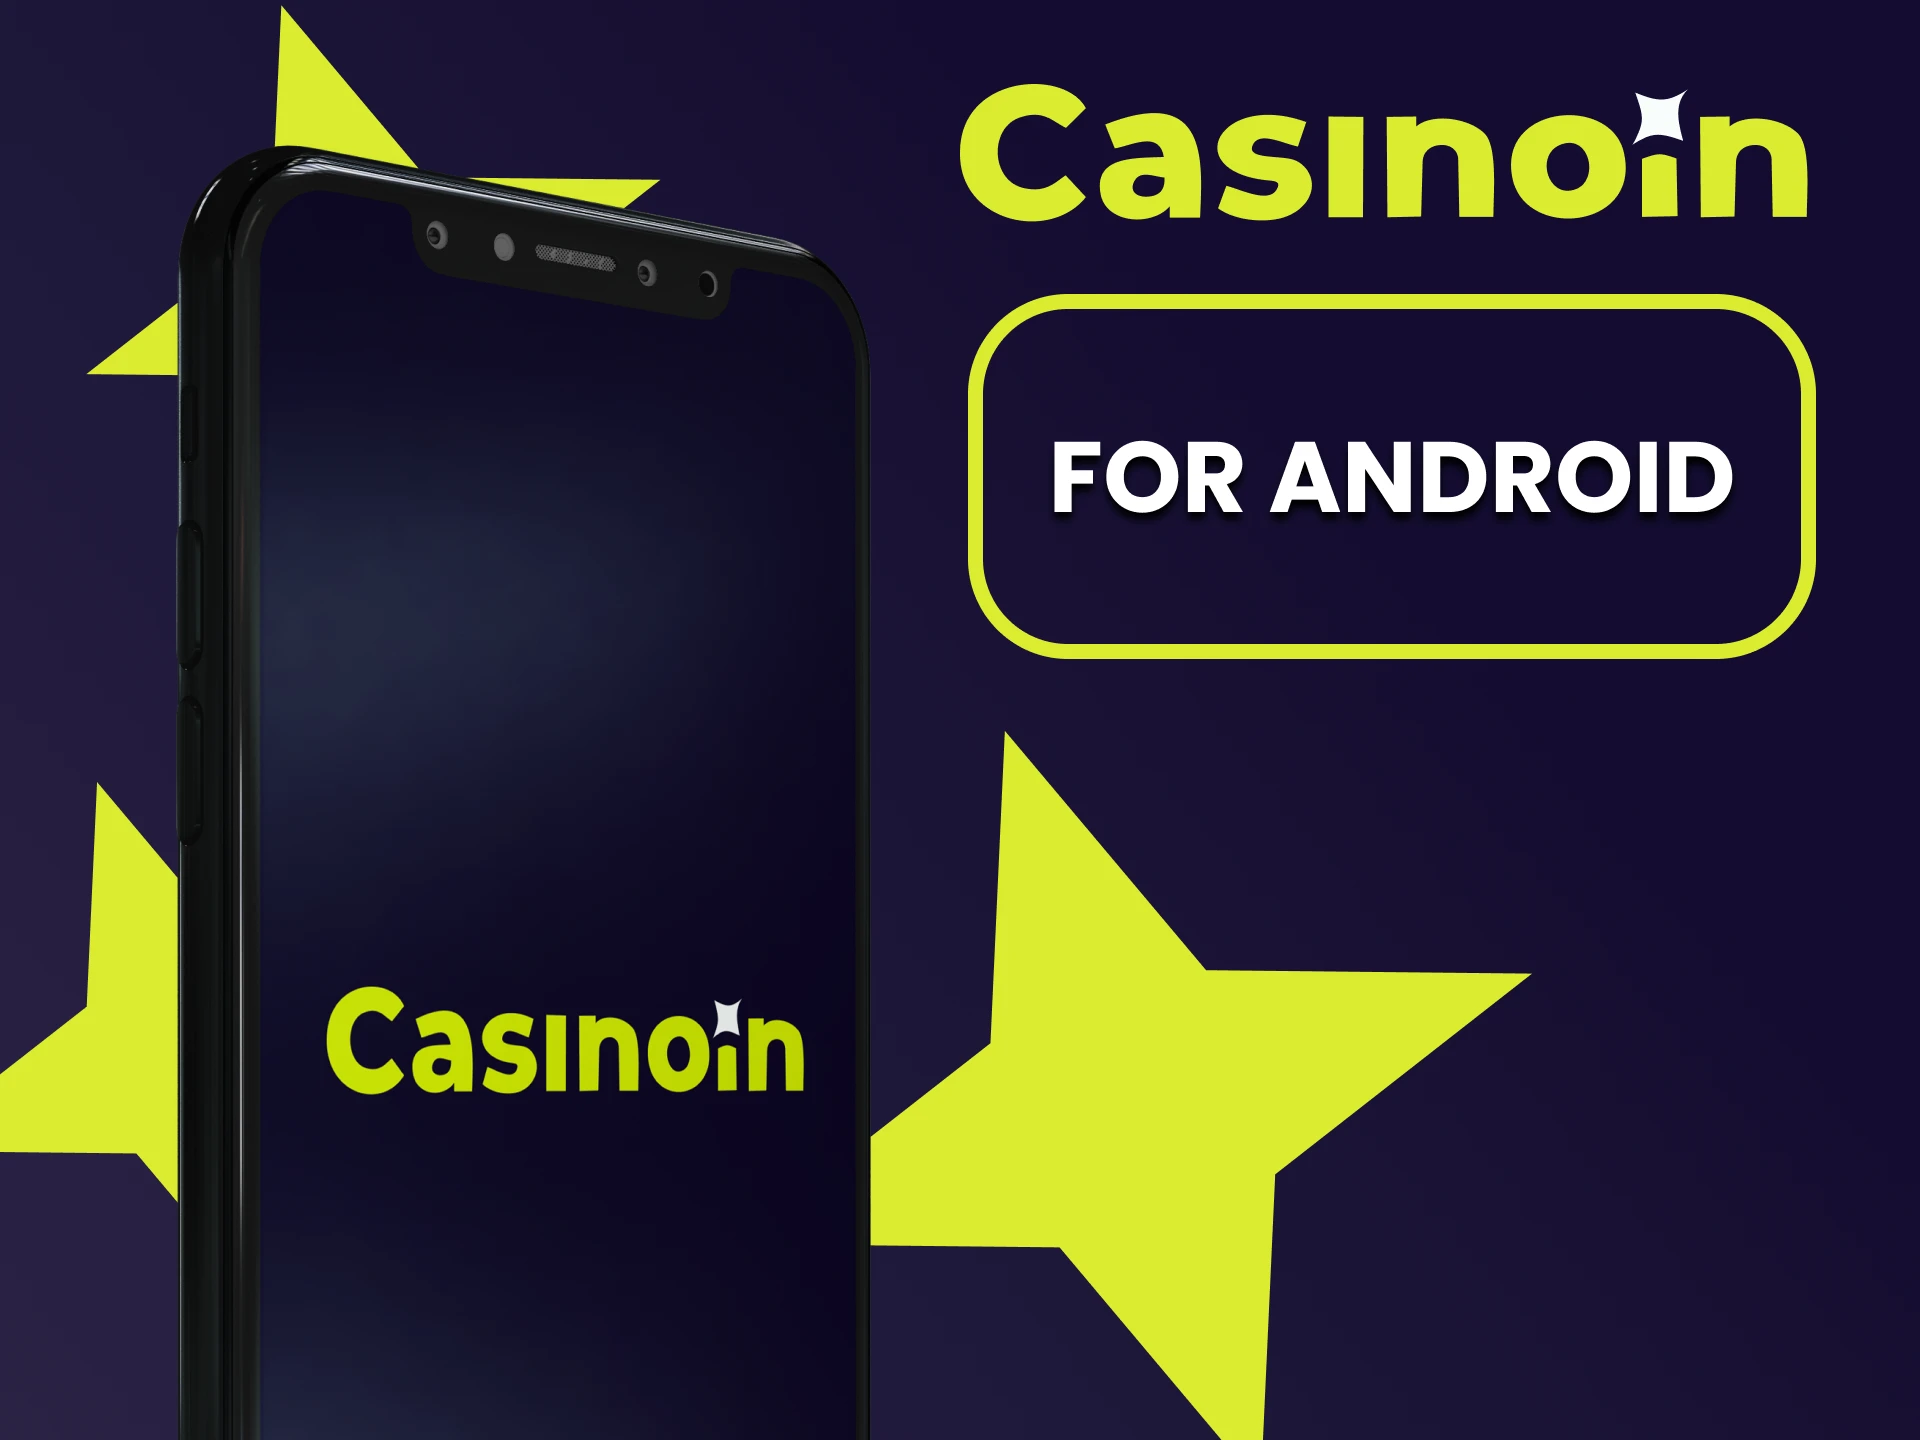 Download the Casinoin app for Android.